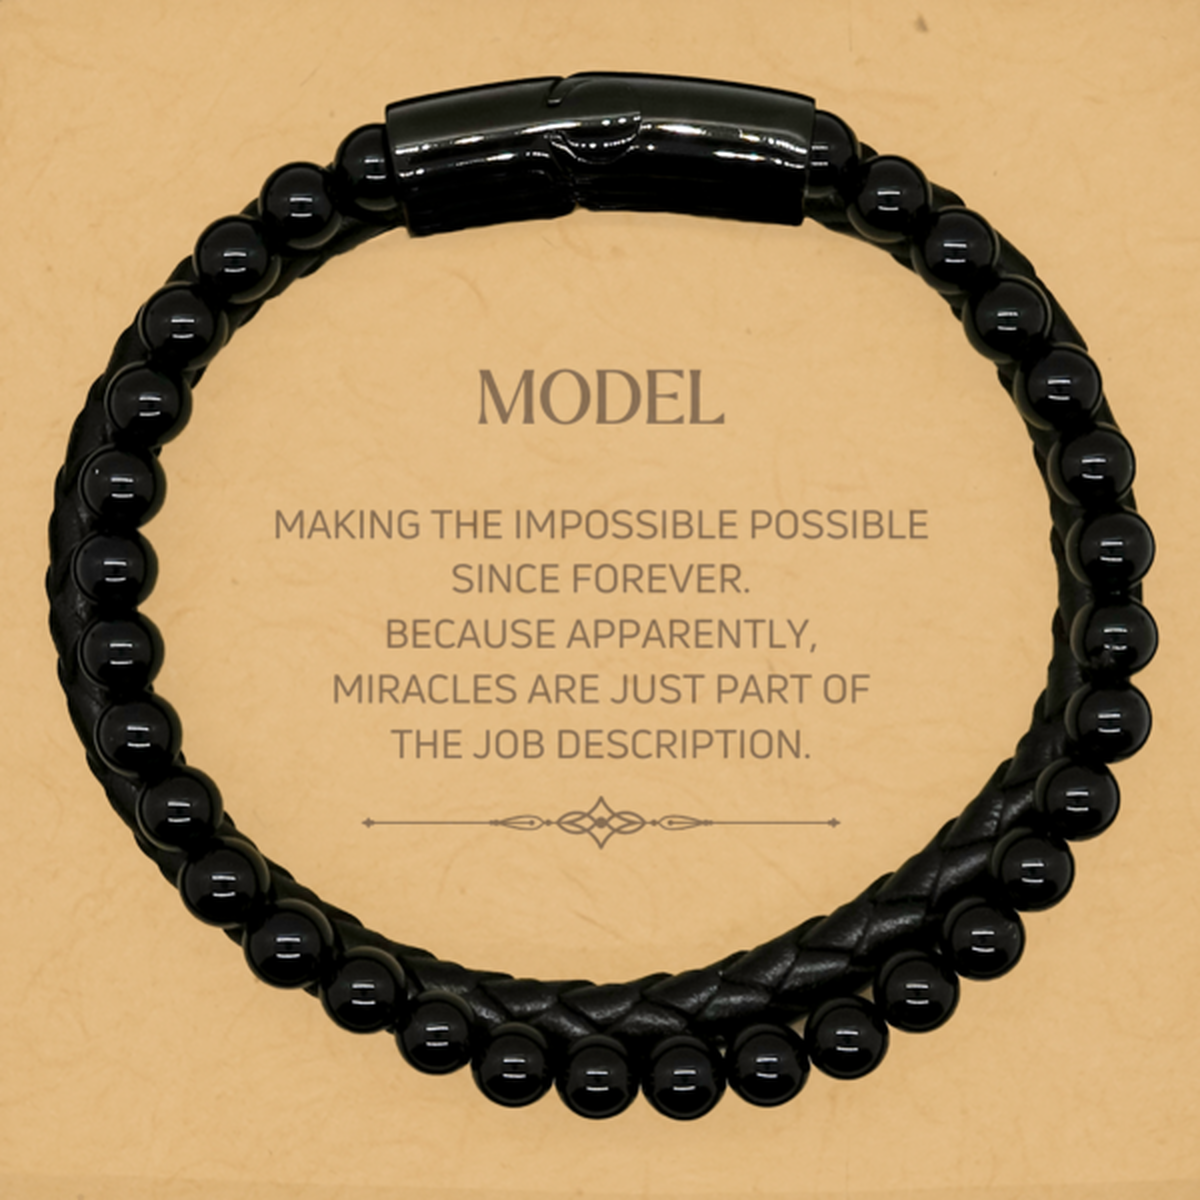 Funny Model Gifts, Miracles are just part of the job description, Inspirational Birthday Stone Leather Bracelets For Model, Men, Women, Coworkers, Friends, Boss